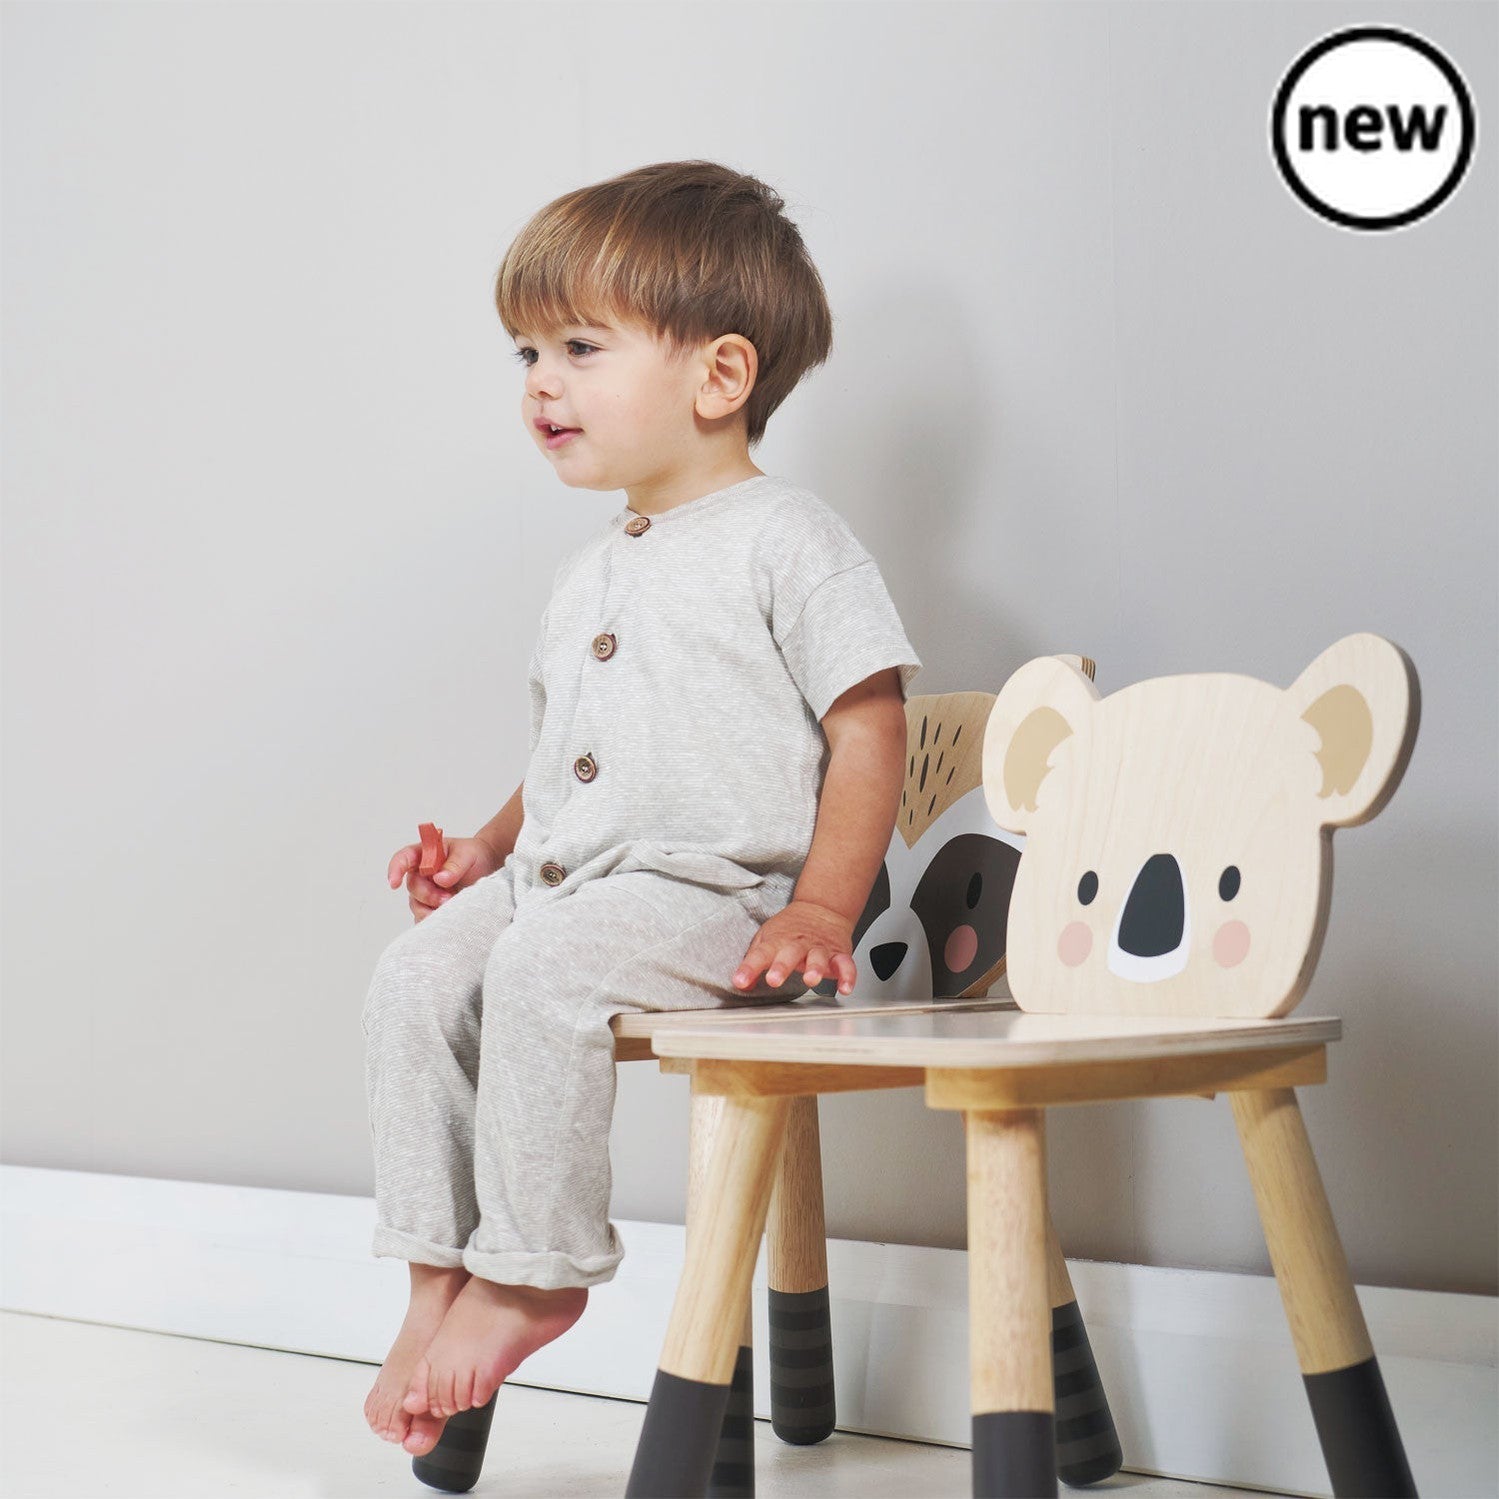 Tenderleaf Toys Wooden Forest Koala Chair, This fun high quality plywood Koala chair by Tender Leaf Toys works perfectly with the Tender Leaf Toys Forest table, or your own small table. Children will love sitting in this very fun Koala chair! Self Assembly 0.345x0.102x0.325 meters, Tenderleaf Toys Wooden Forest Koala Chair,Wooden Toys,Tenderleaf, 